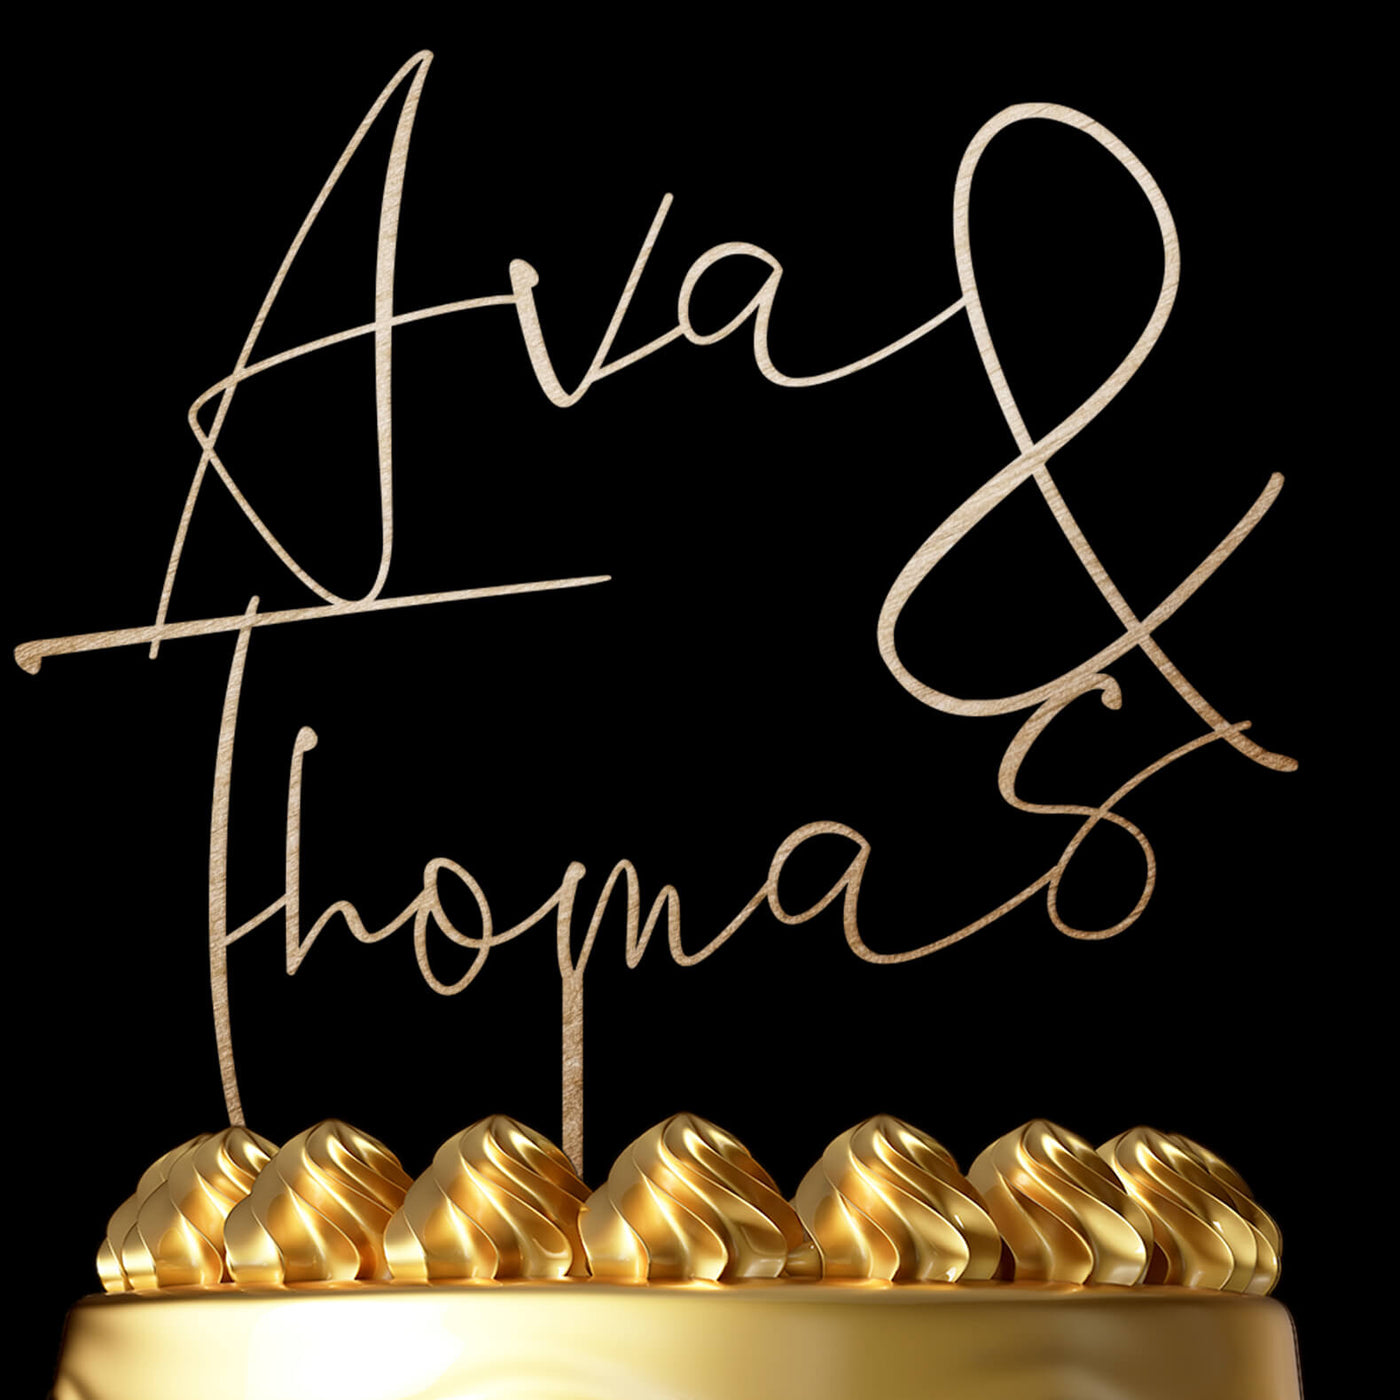 Personalized Cake Topper Ava - Wedding Cake Topper by Luxtomi